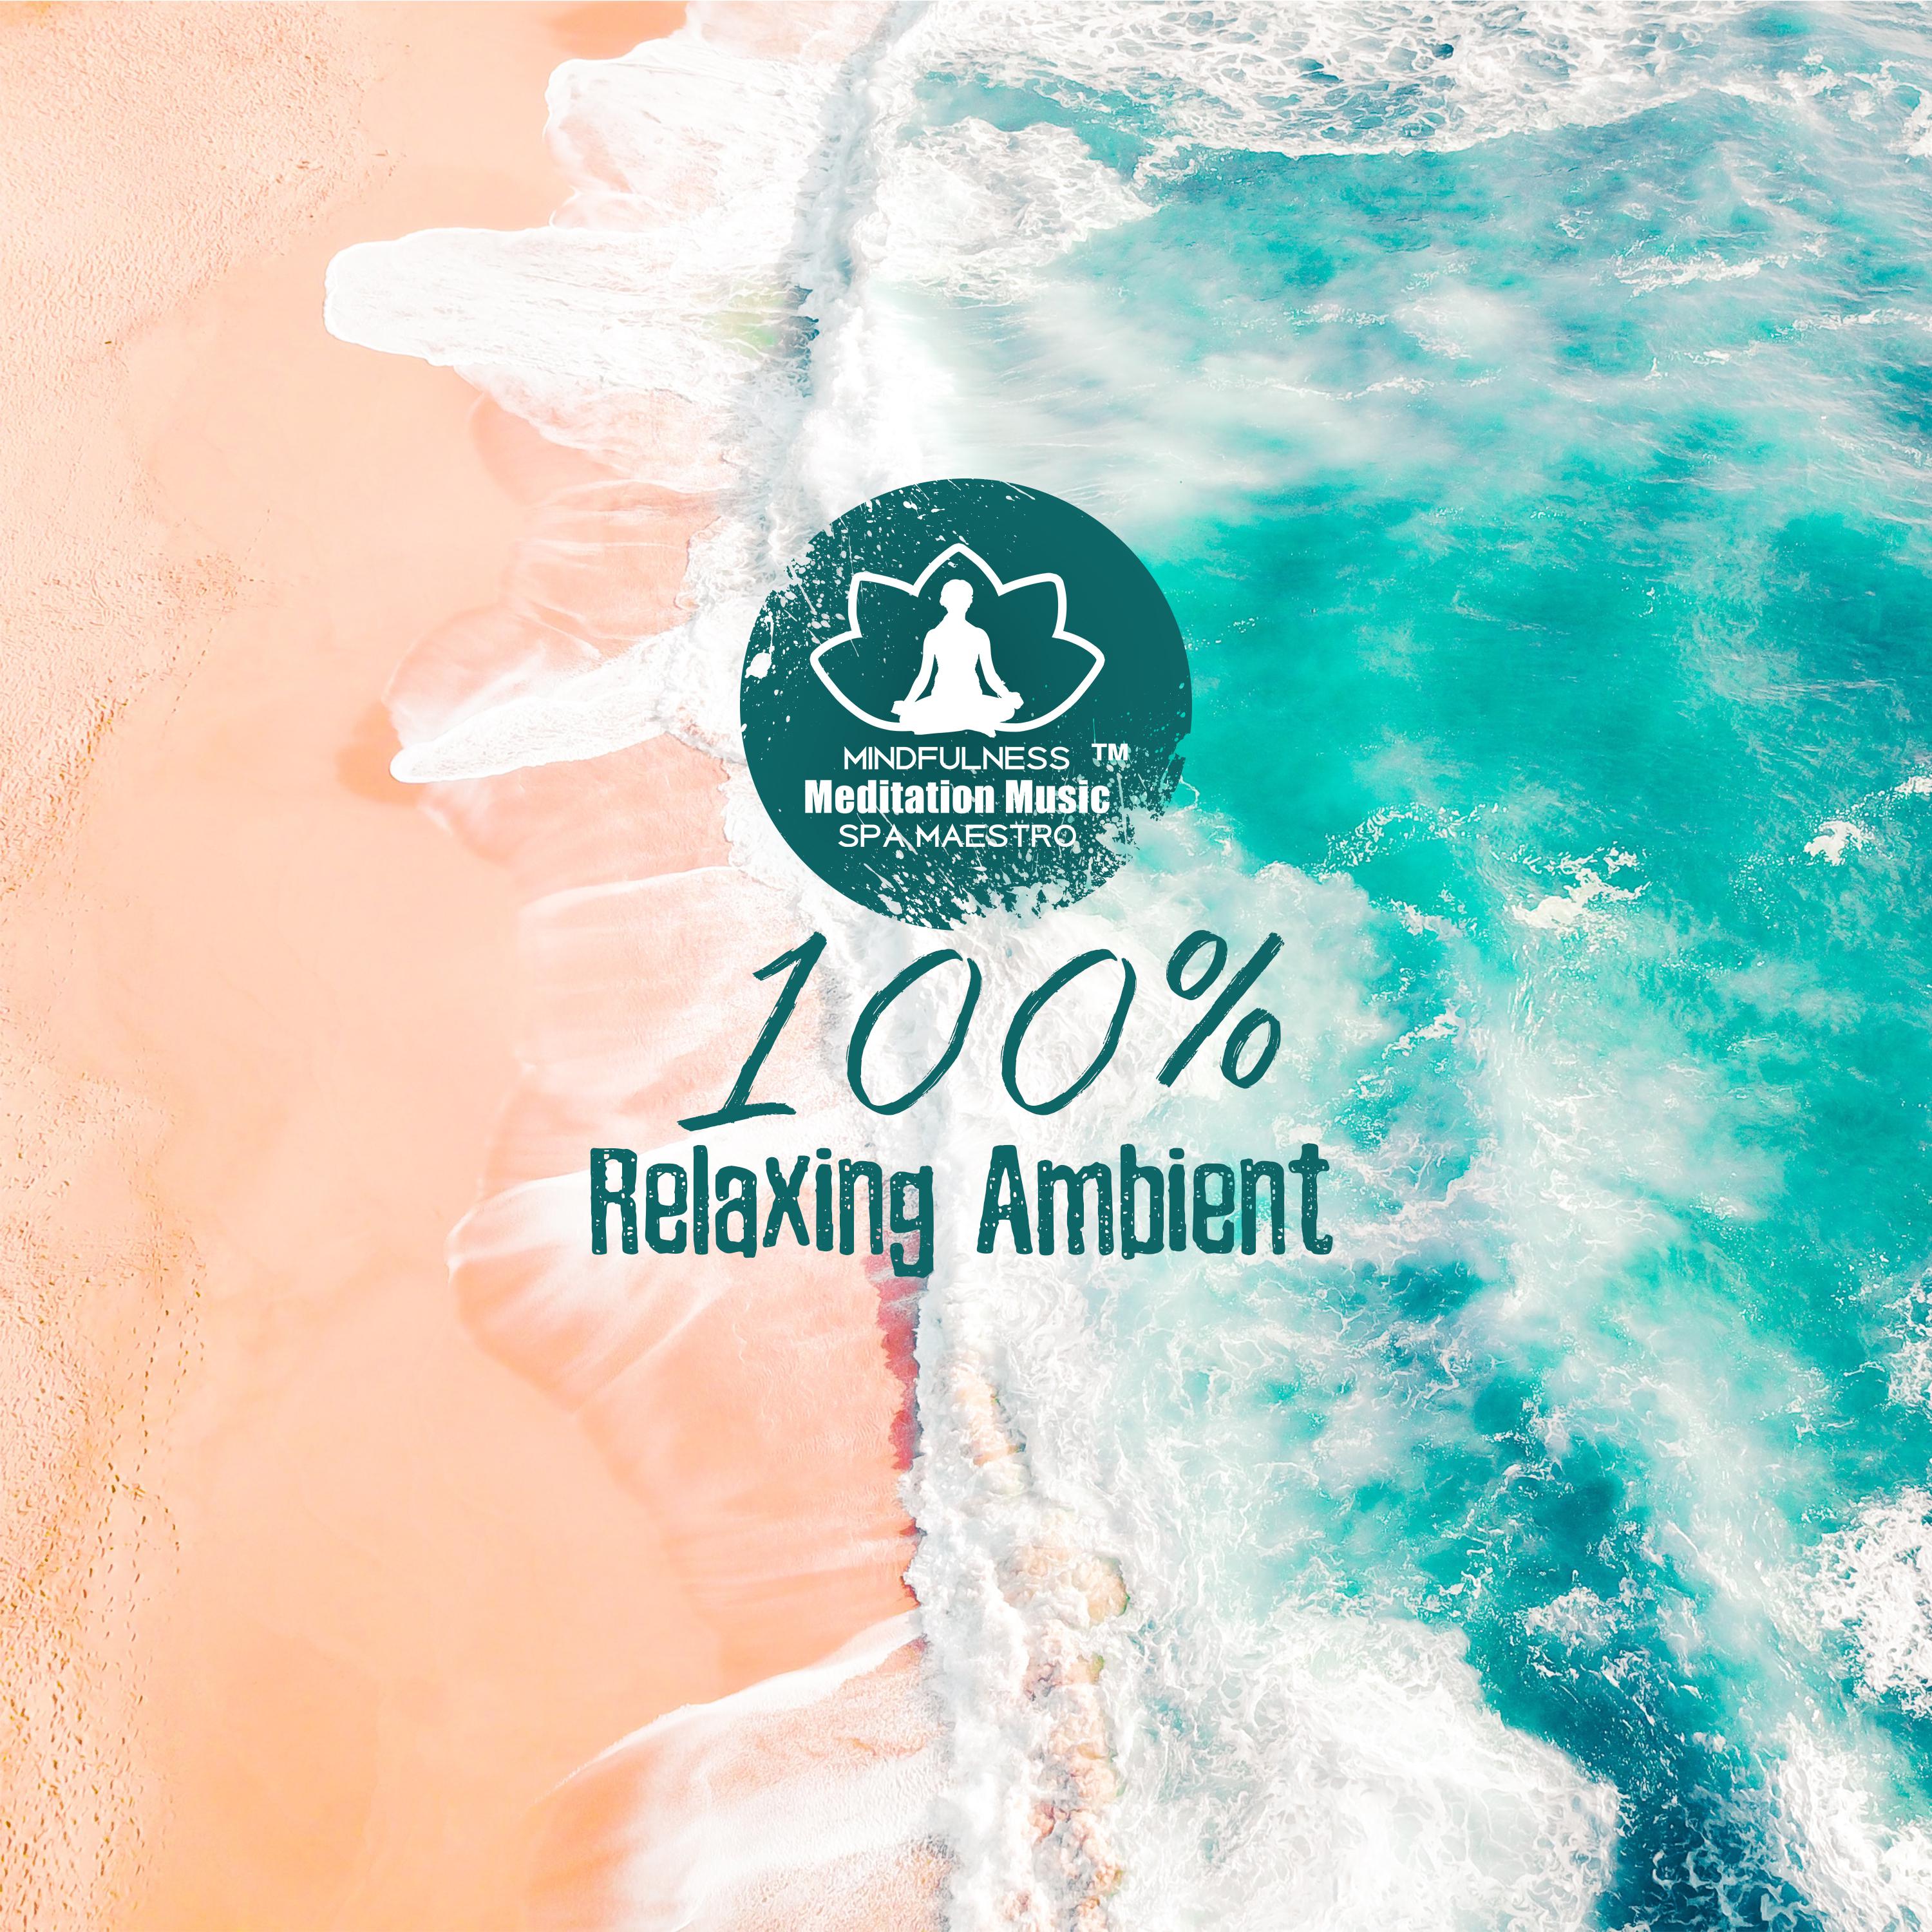 100% Relaxing Ambient (Spa, Wellness, Meditation)